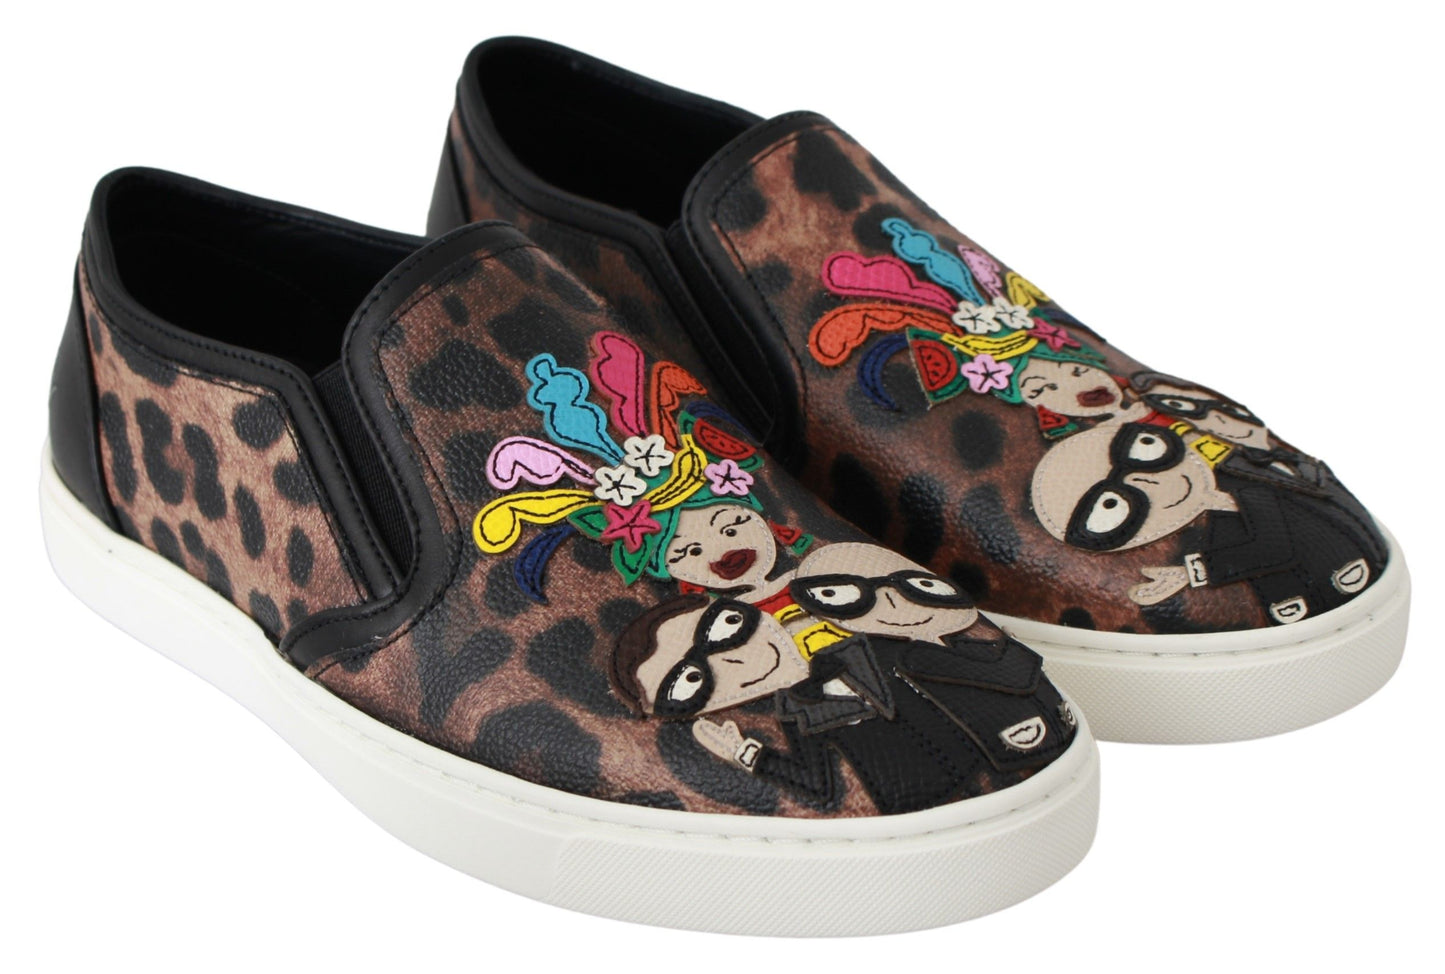 Dolce & Gabbana Leather Leopard #dgfamily Loafers Shoes